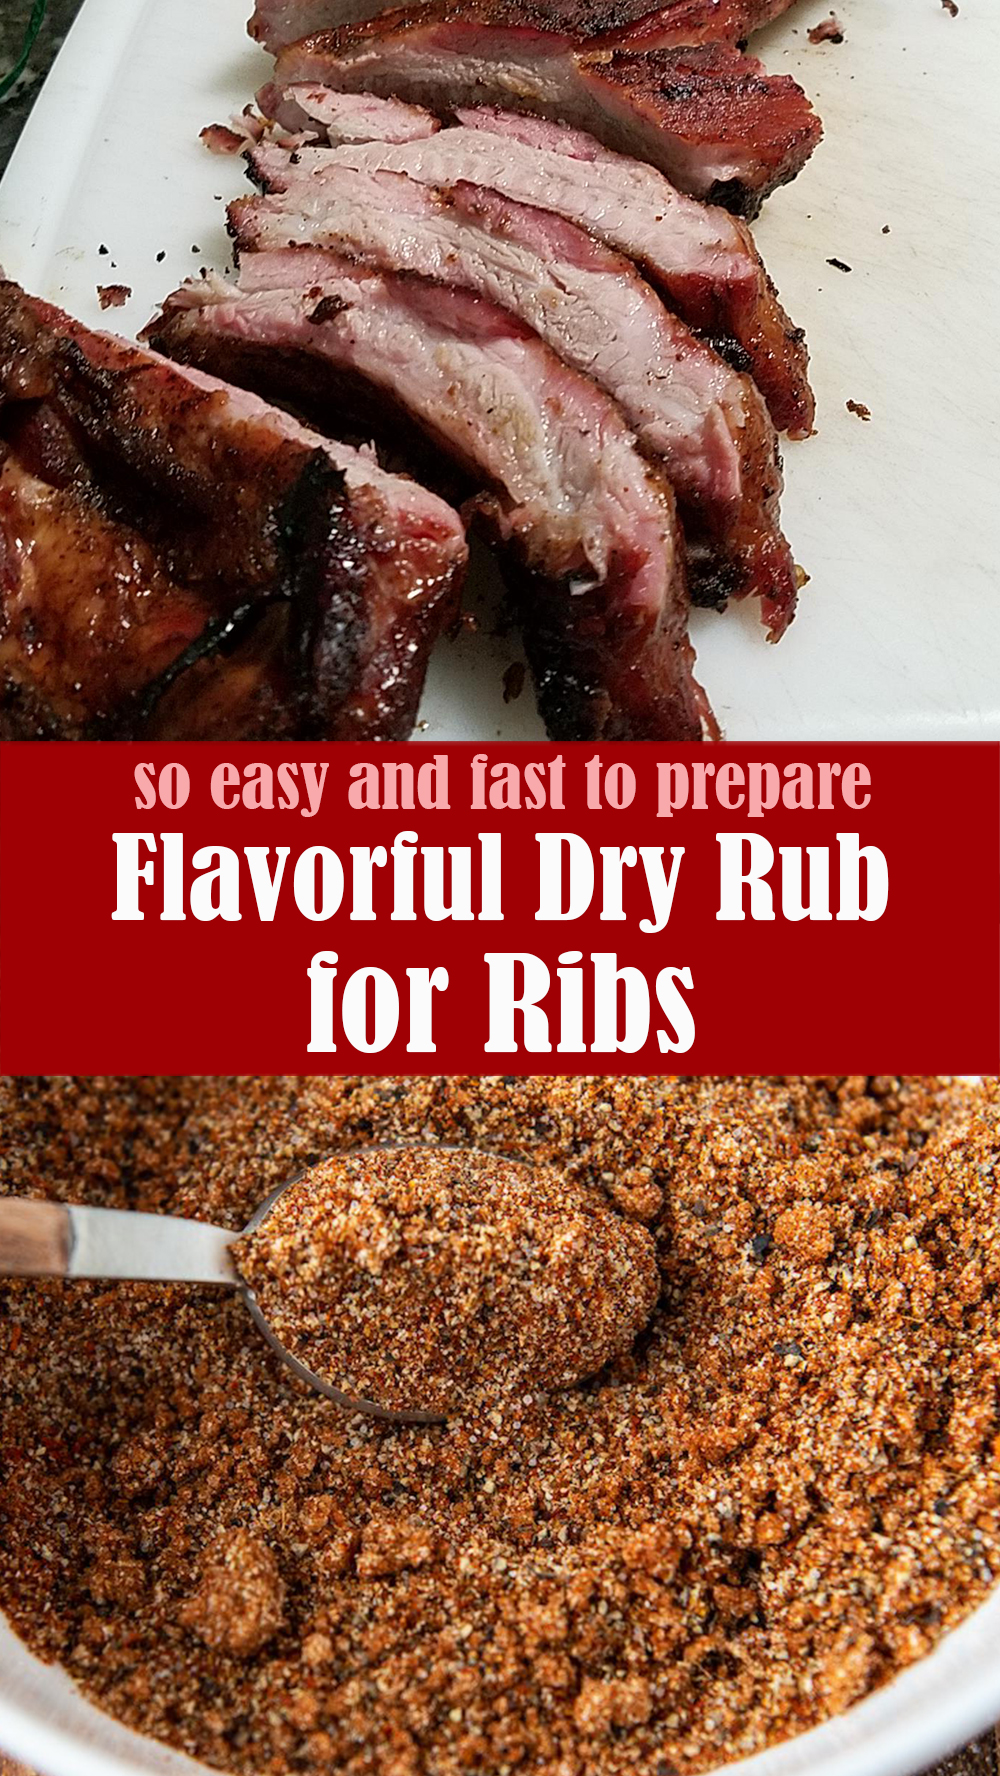 Flavorful Dry Rub for Ribs